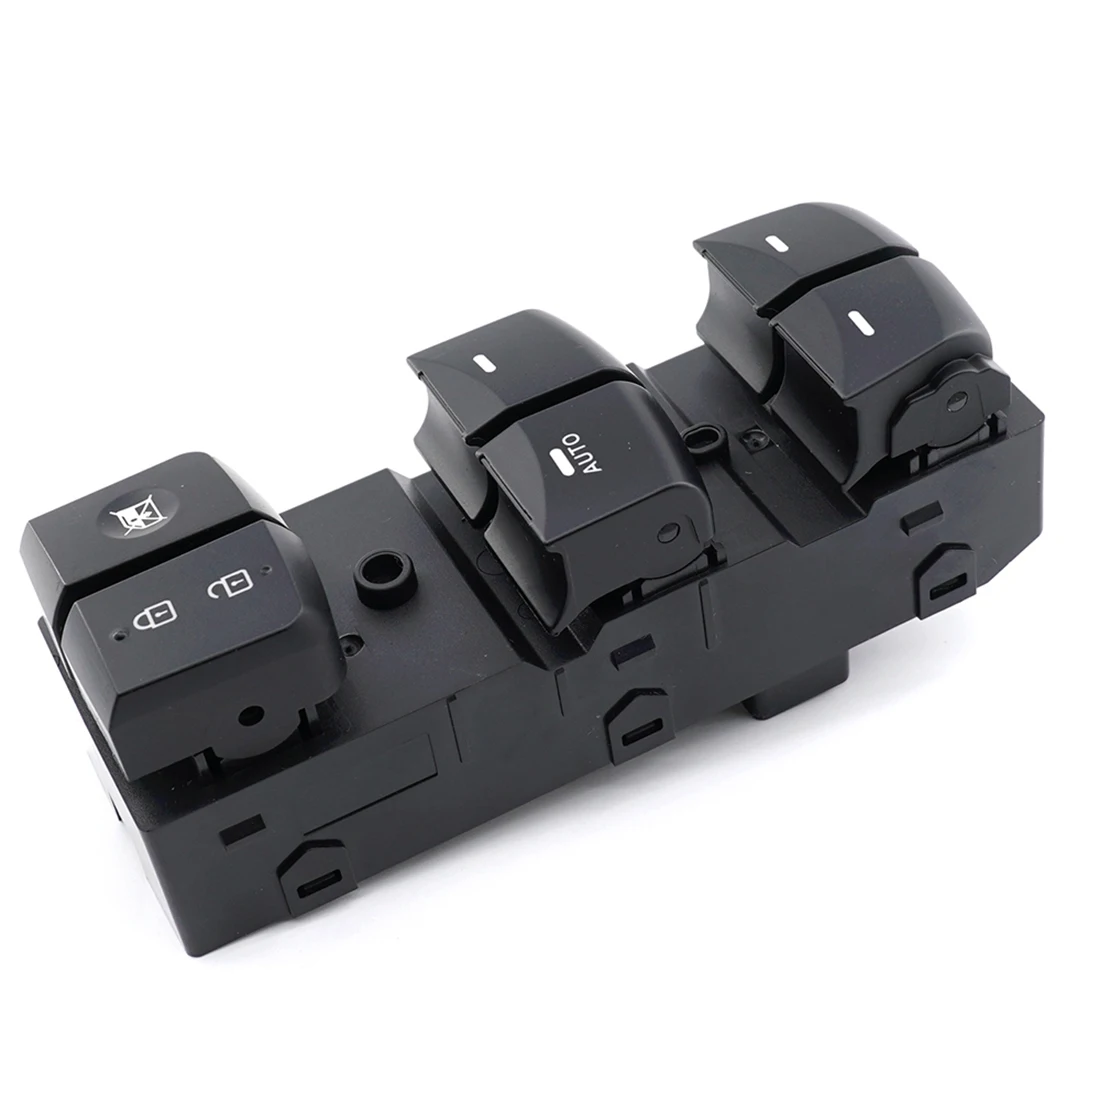 

For Hyundai Elantra Lang Move 2012-2016 Electric Power Window Master Switch 93570-4V010 Car Accessories Black